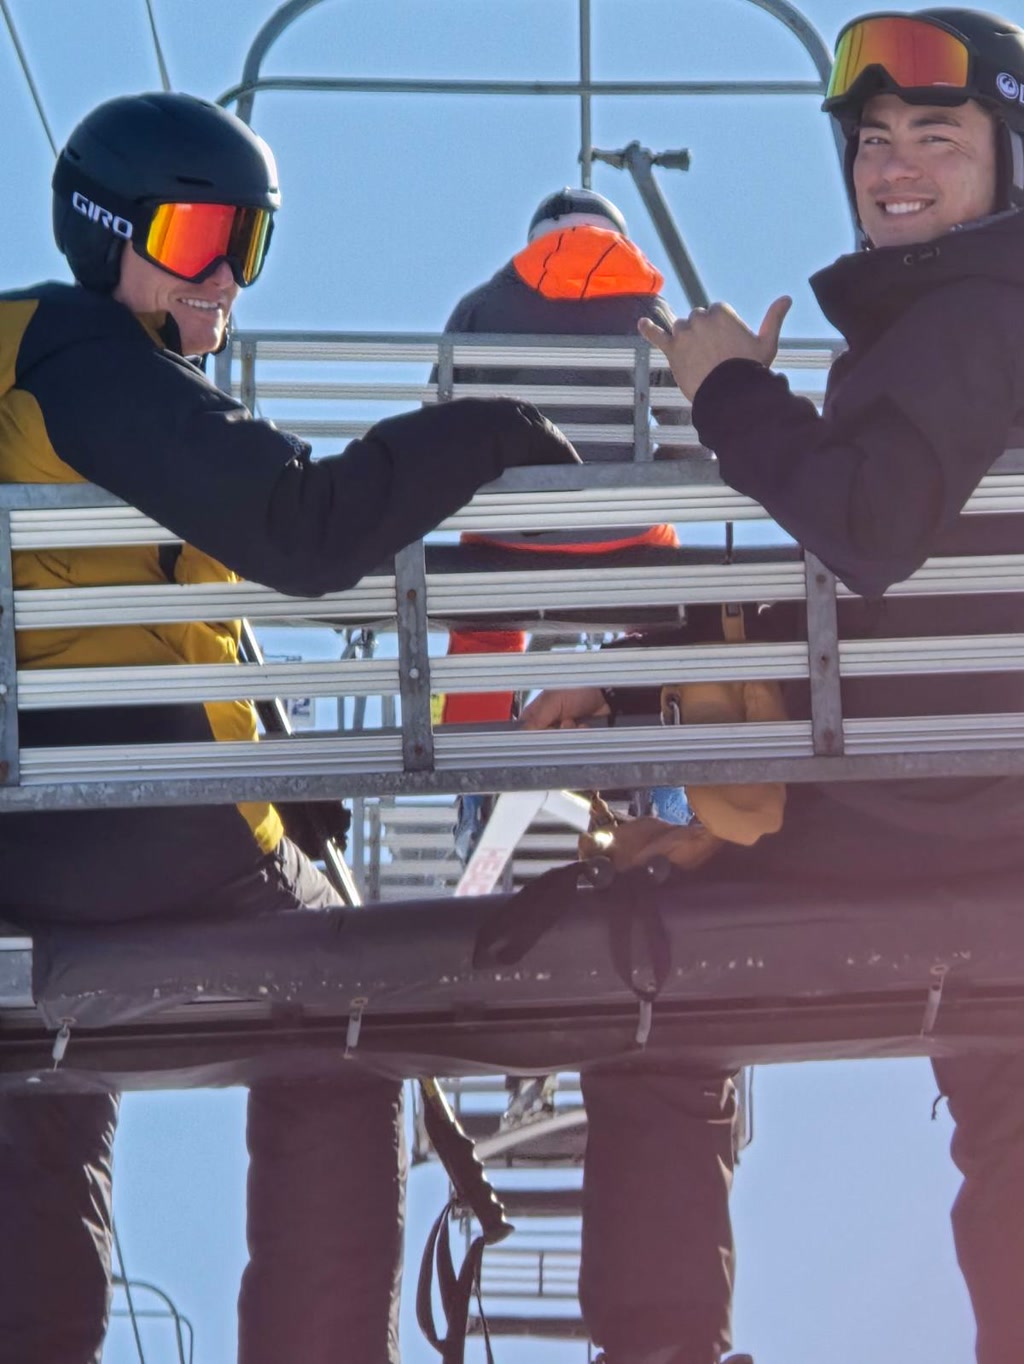 Two people are sitting on a chairlift, with both facing the camera and smiling. The person on the left is wearing a yellow and black jacket with a black helmet and reflective ski goggles. They are holding up their right fist as if knocking on an invisible door. The person on the right is dressed in a black jacket and also wearing a black helmet equipped with reflective ski goggles. They are making a 'hang loose' hand gesture with their right hand, which involves extending the thumb and little finger while holding the other fingers with the palm facing out. Behind them is a bright, clear sky, and the chairlift structure is visible above their heads. Although the image is presumed to be taken at a ski resort, no snow or specific ski equipment can be seen from this perspective.